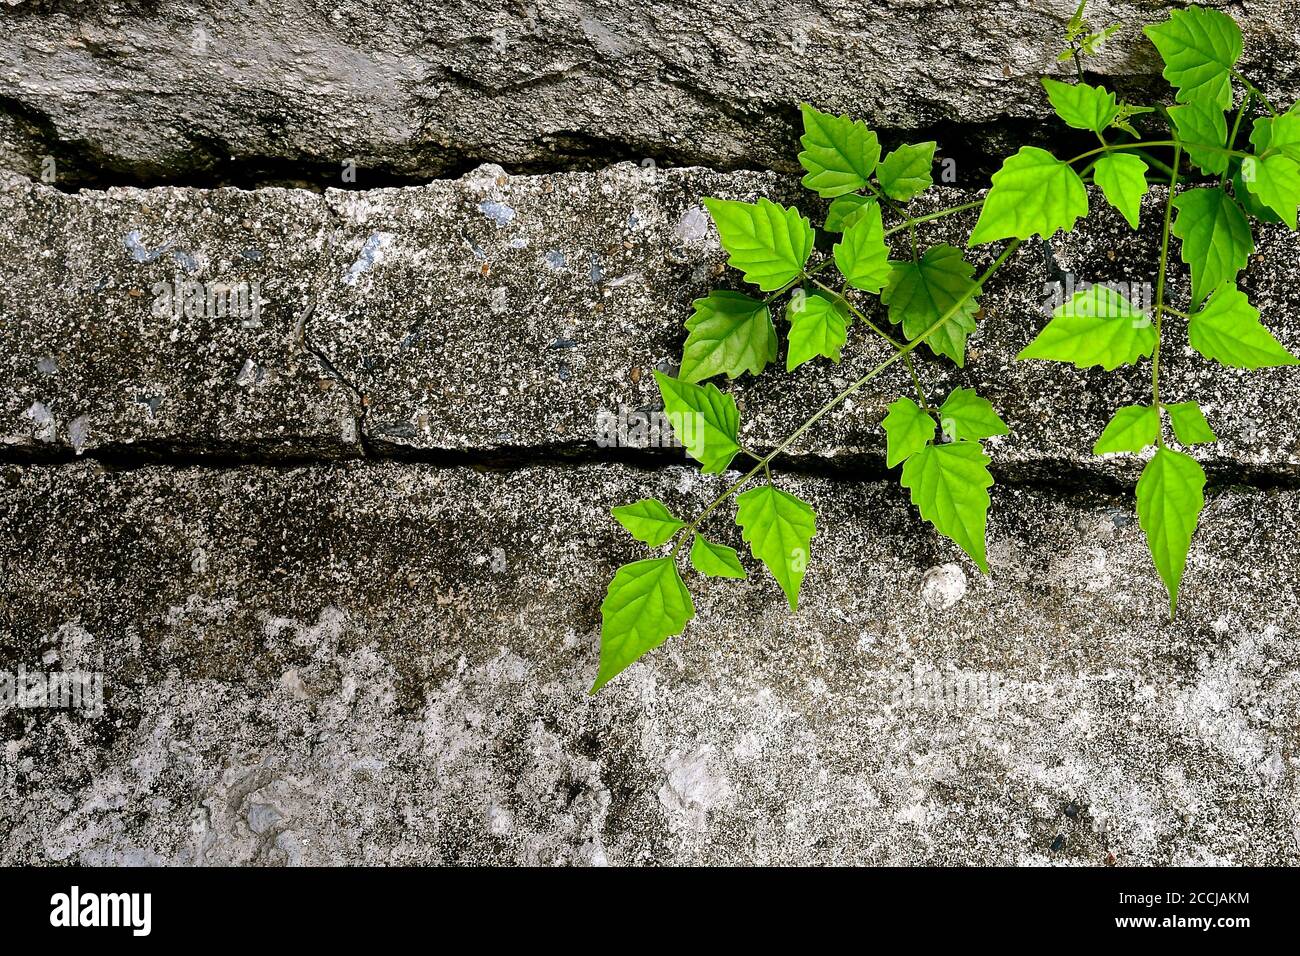 A young plant shoot growing out of a crevice in between some concrete slabs. Stock Photo